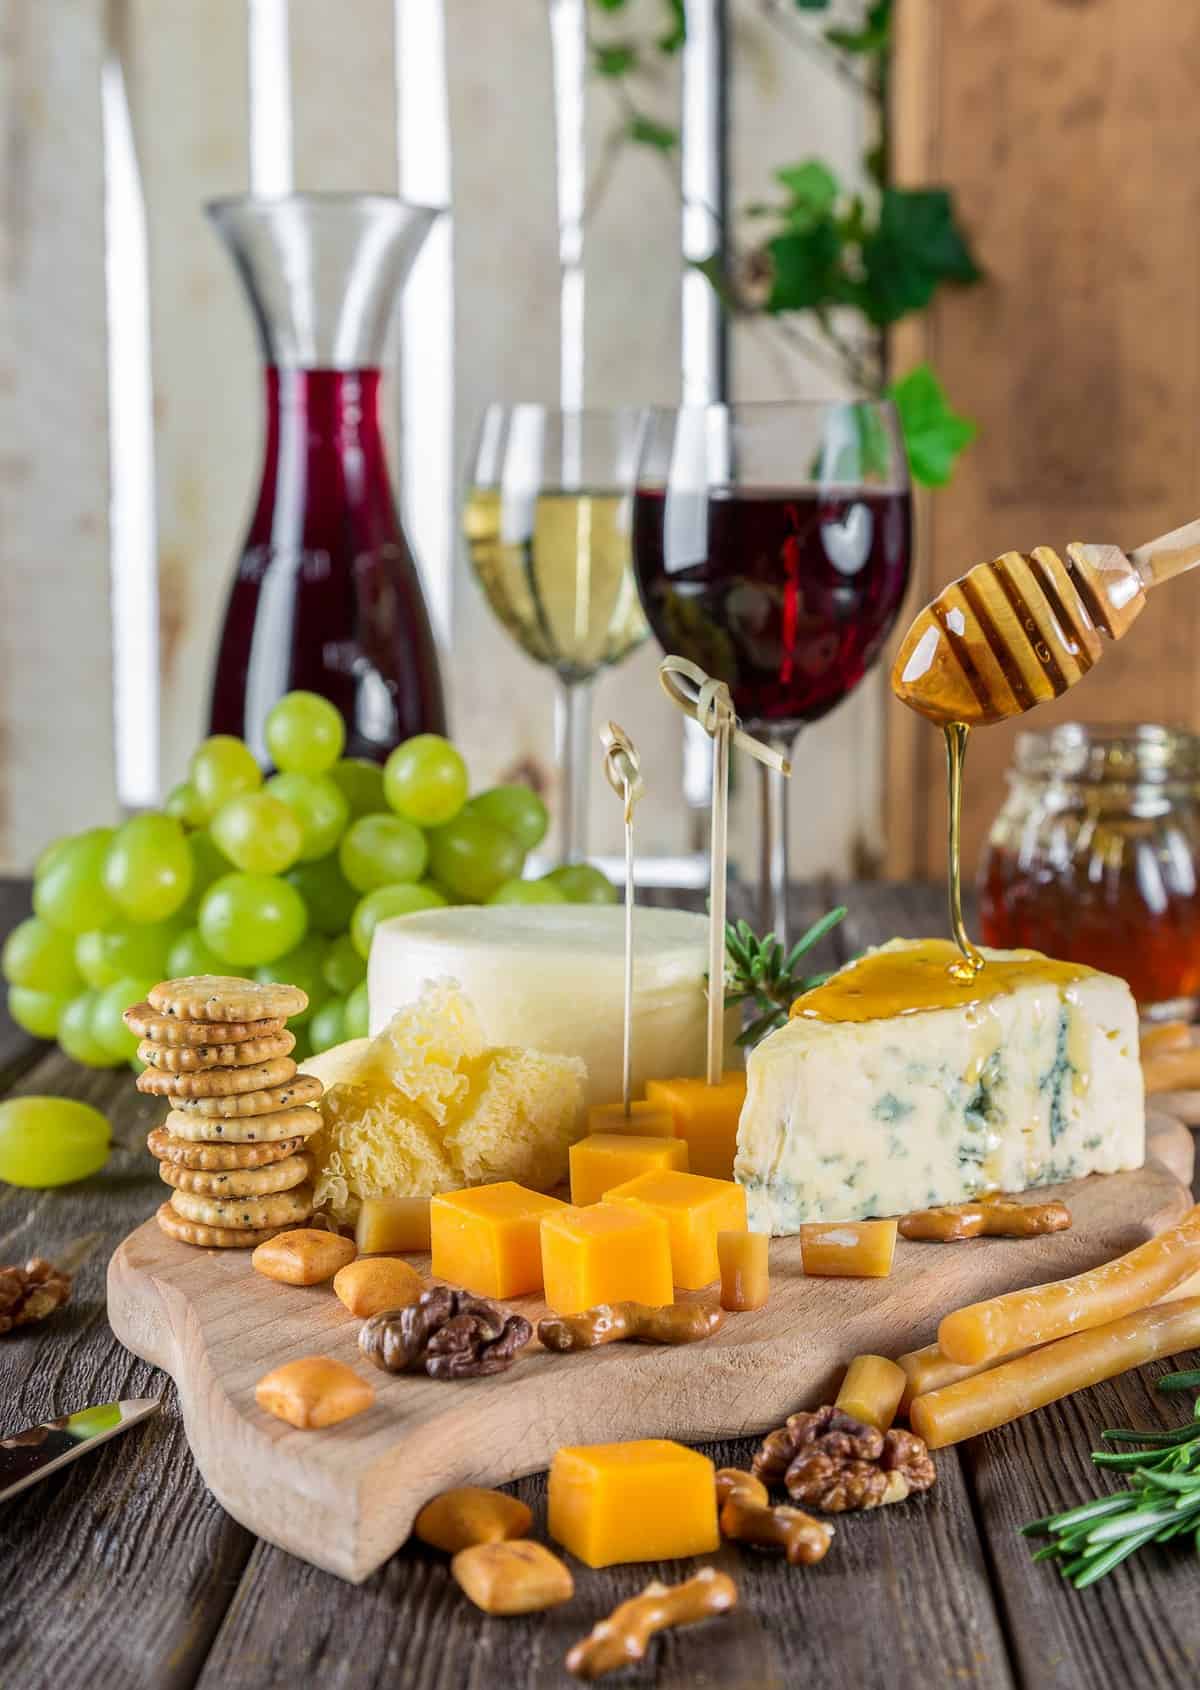 Board with cheese, crackers, honey, and glasses of wine.